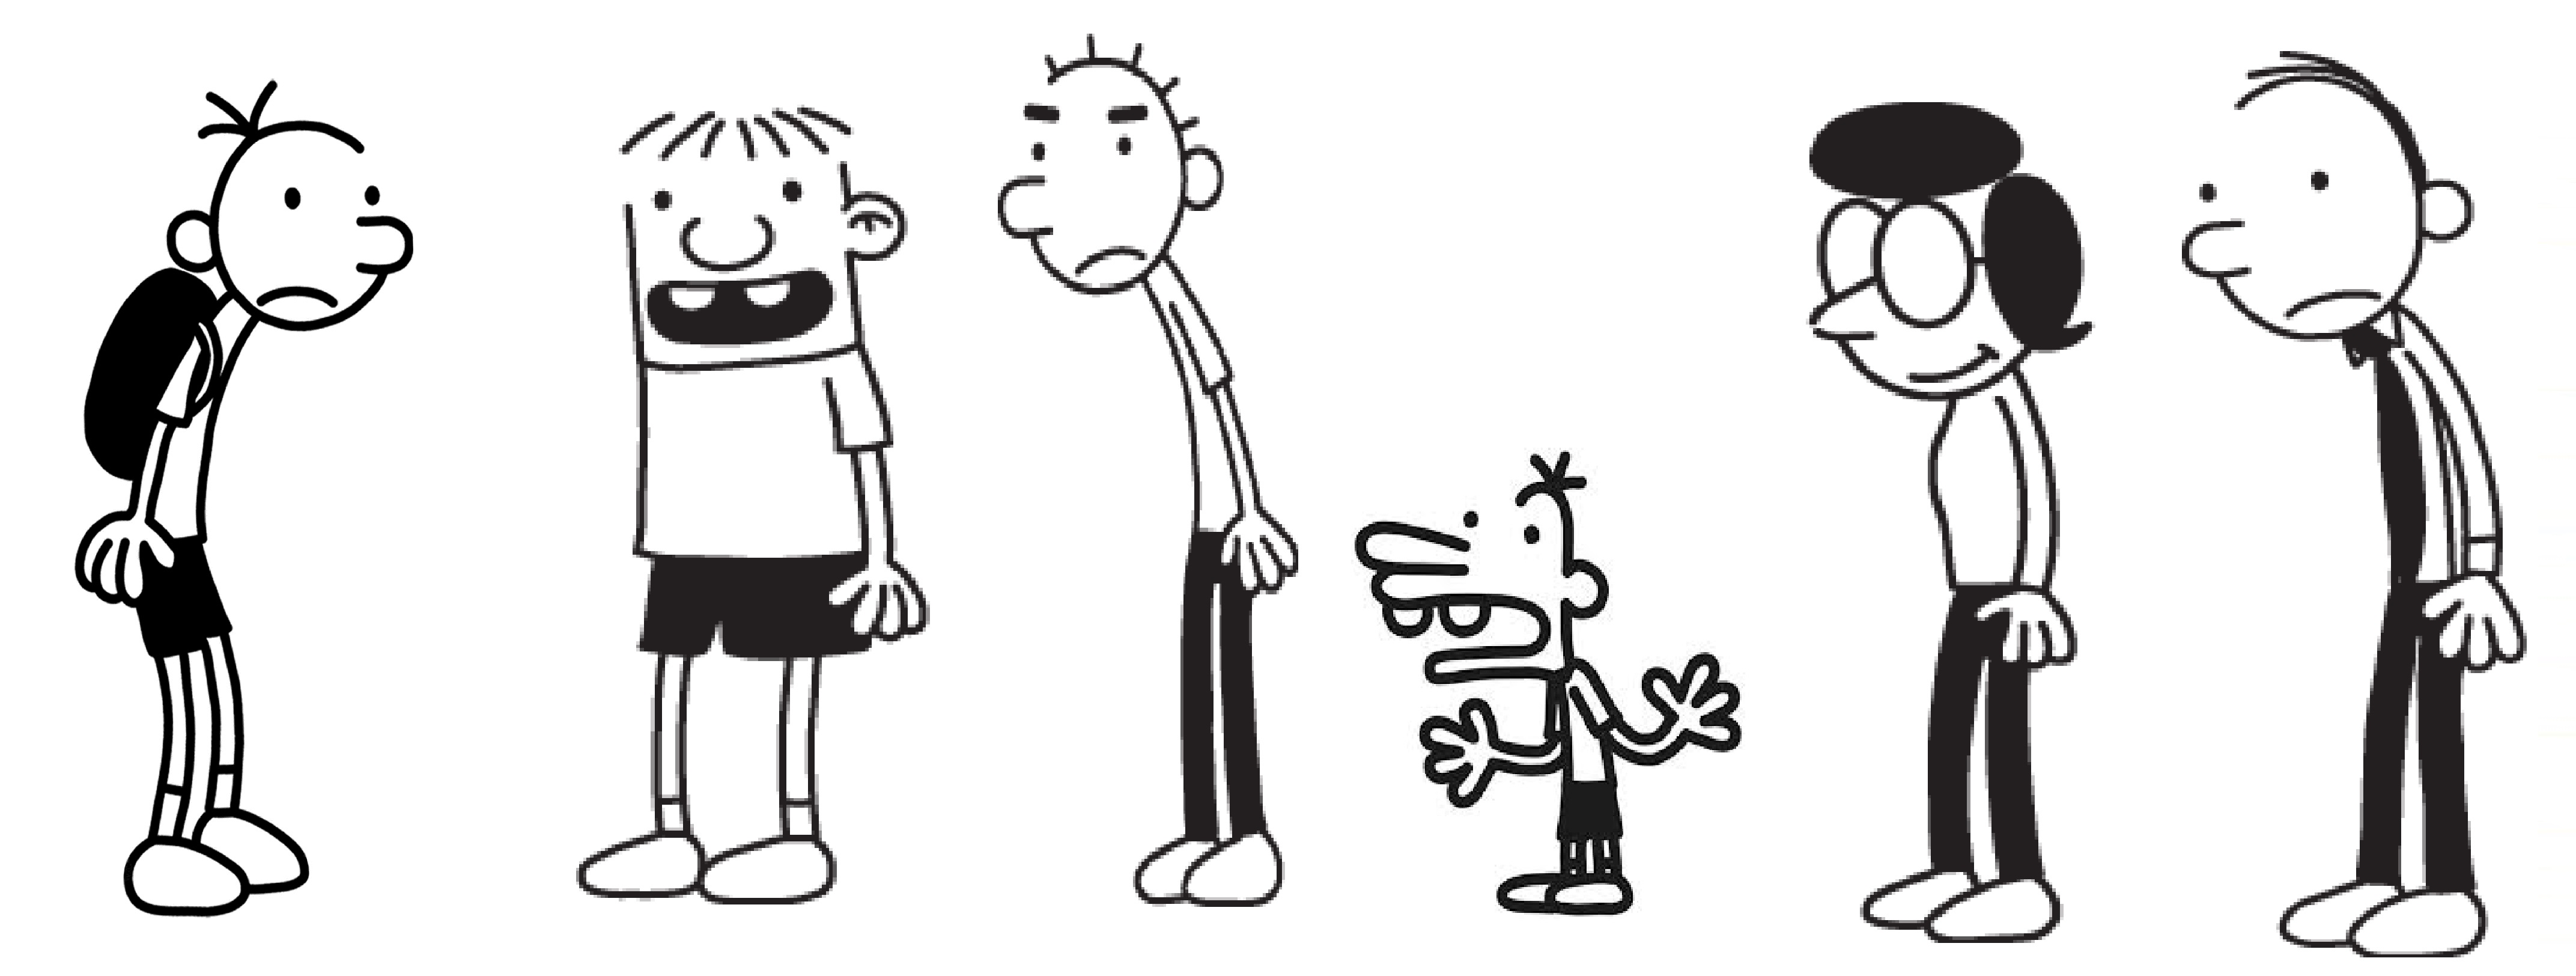 Diary Wimpy Kid Drawing